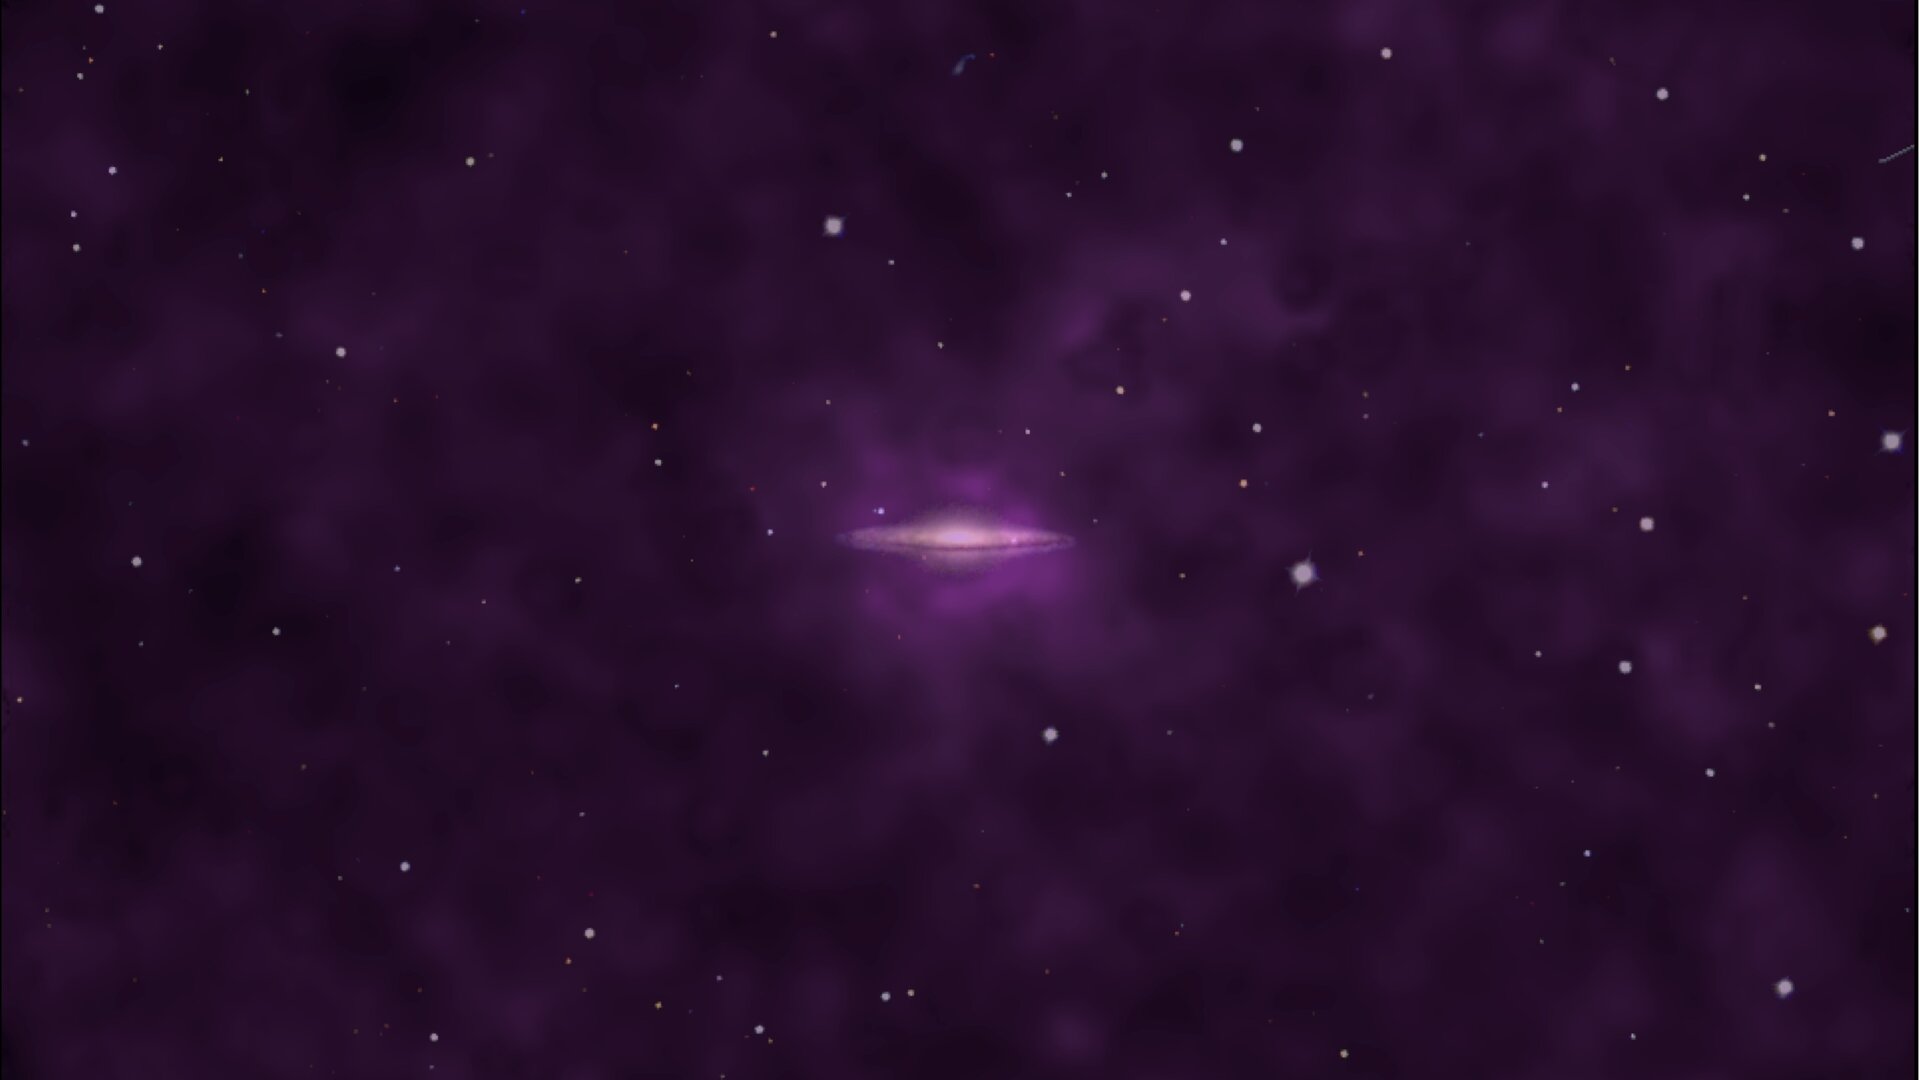 Searching galactic haloes for ‘missing’ matter